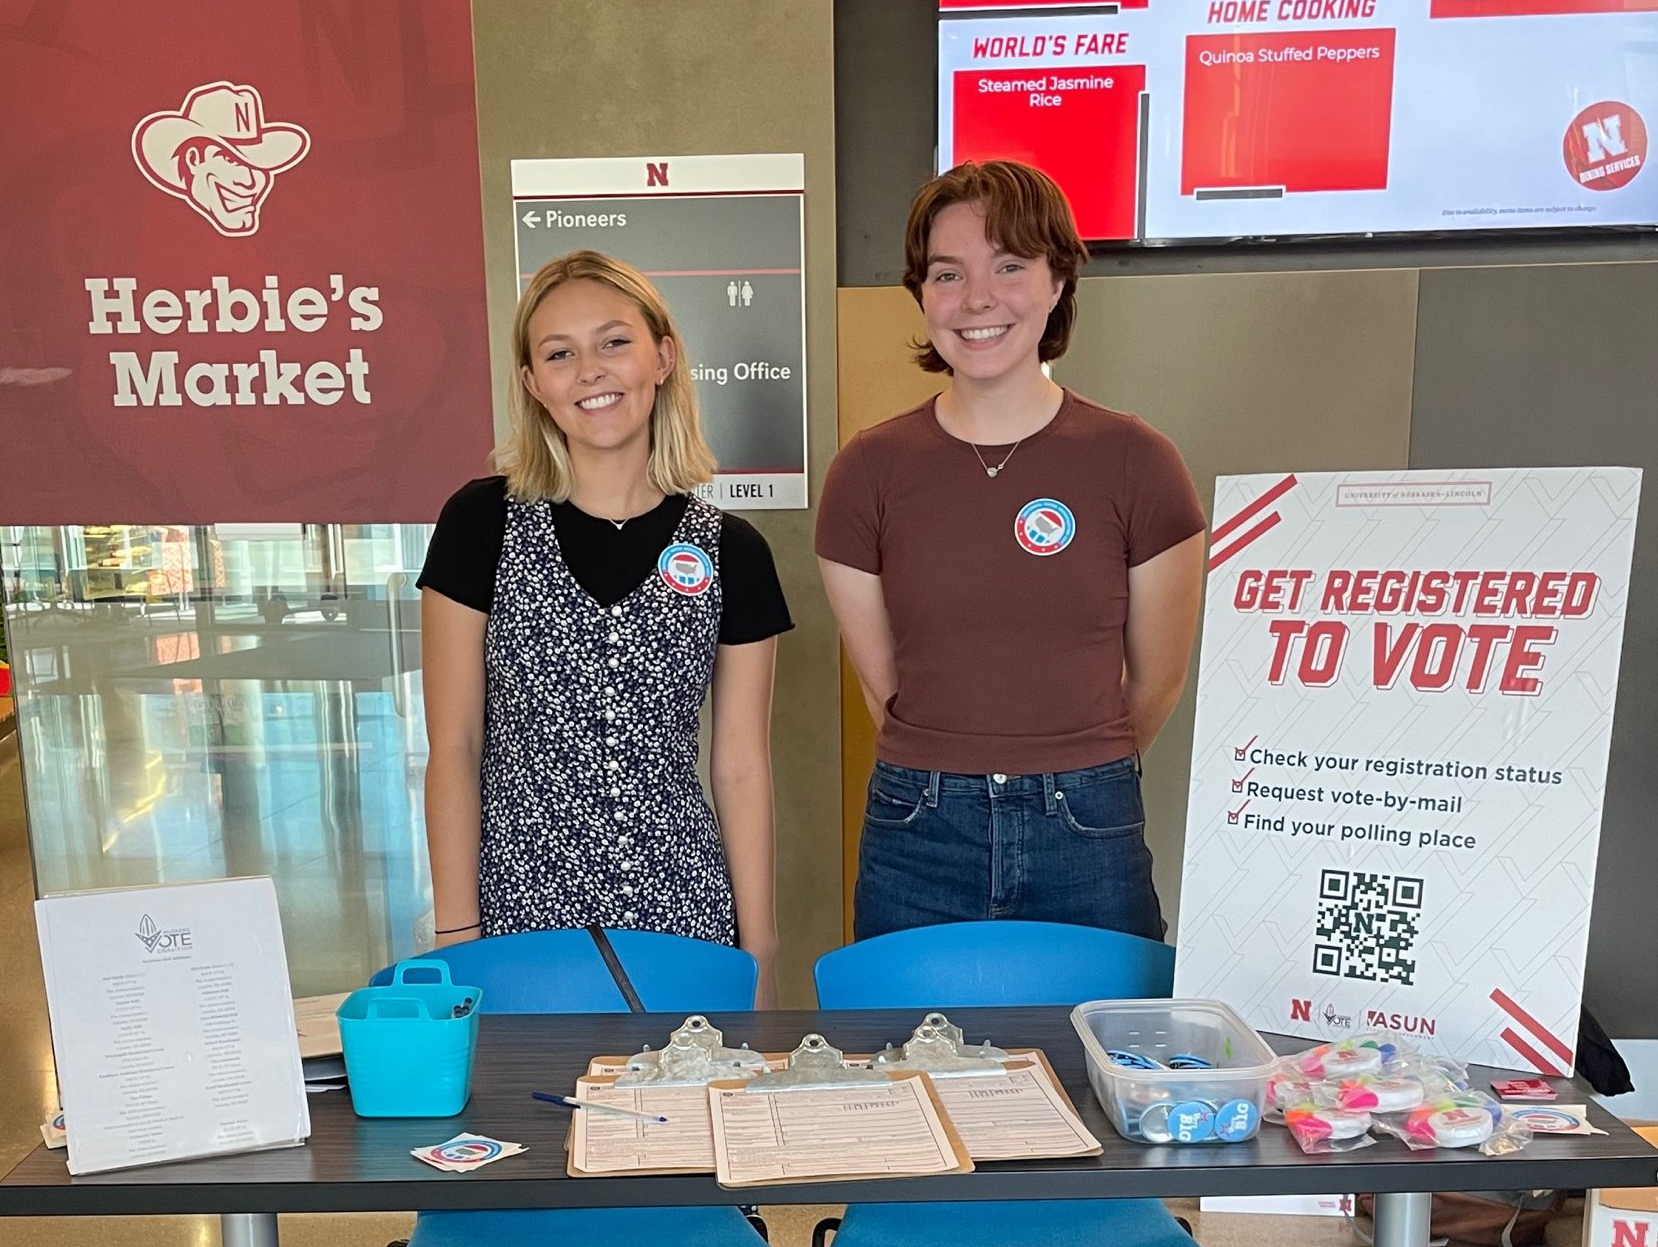 Husker Vote Coalition registering students to vote in upcoming local elections